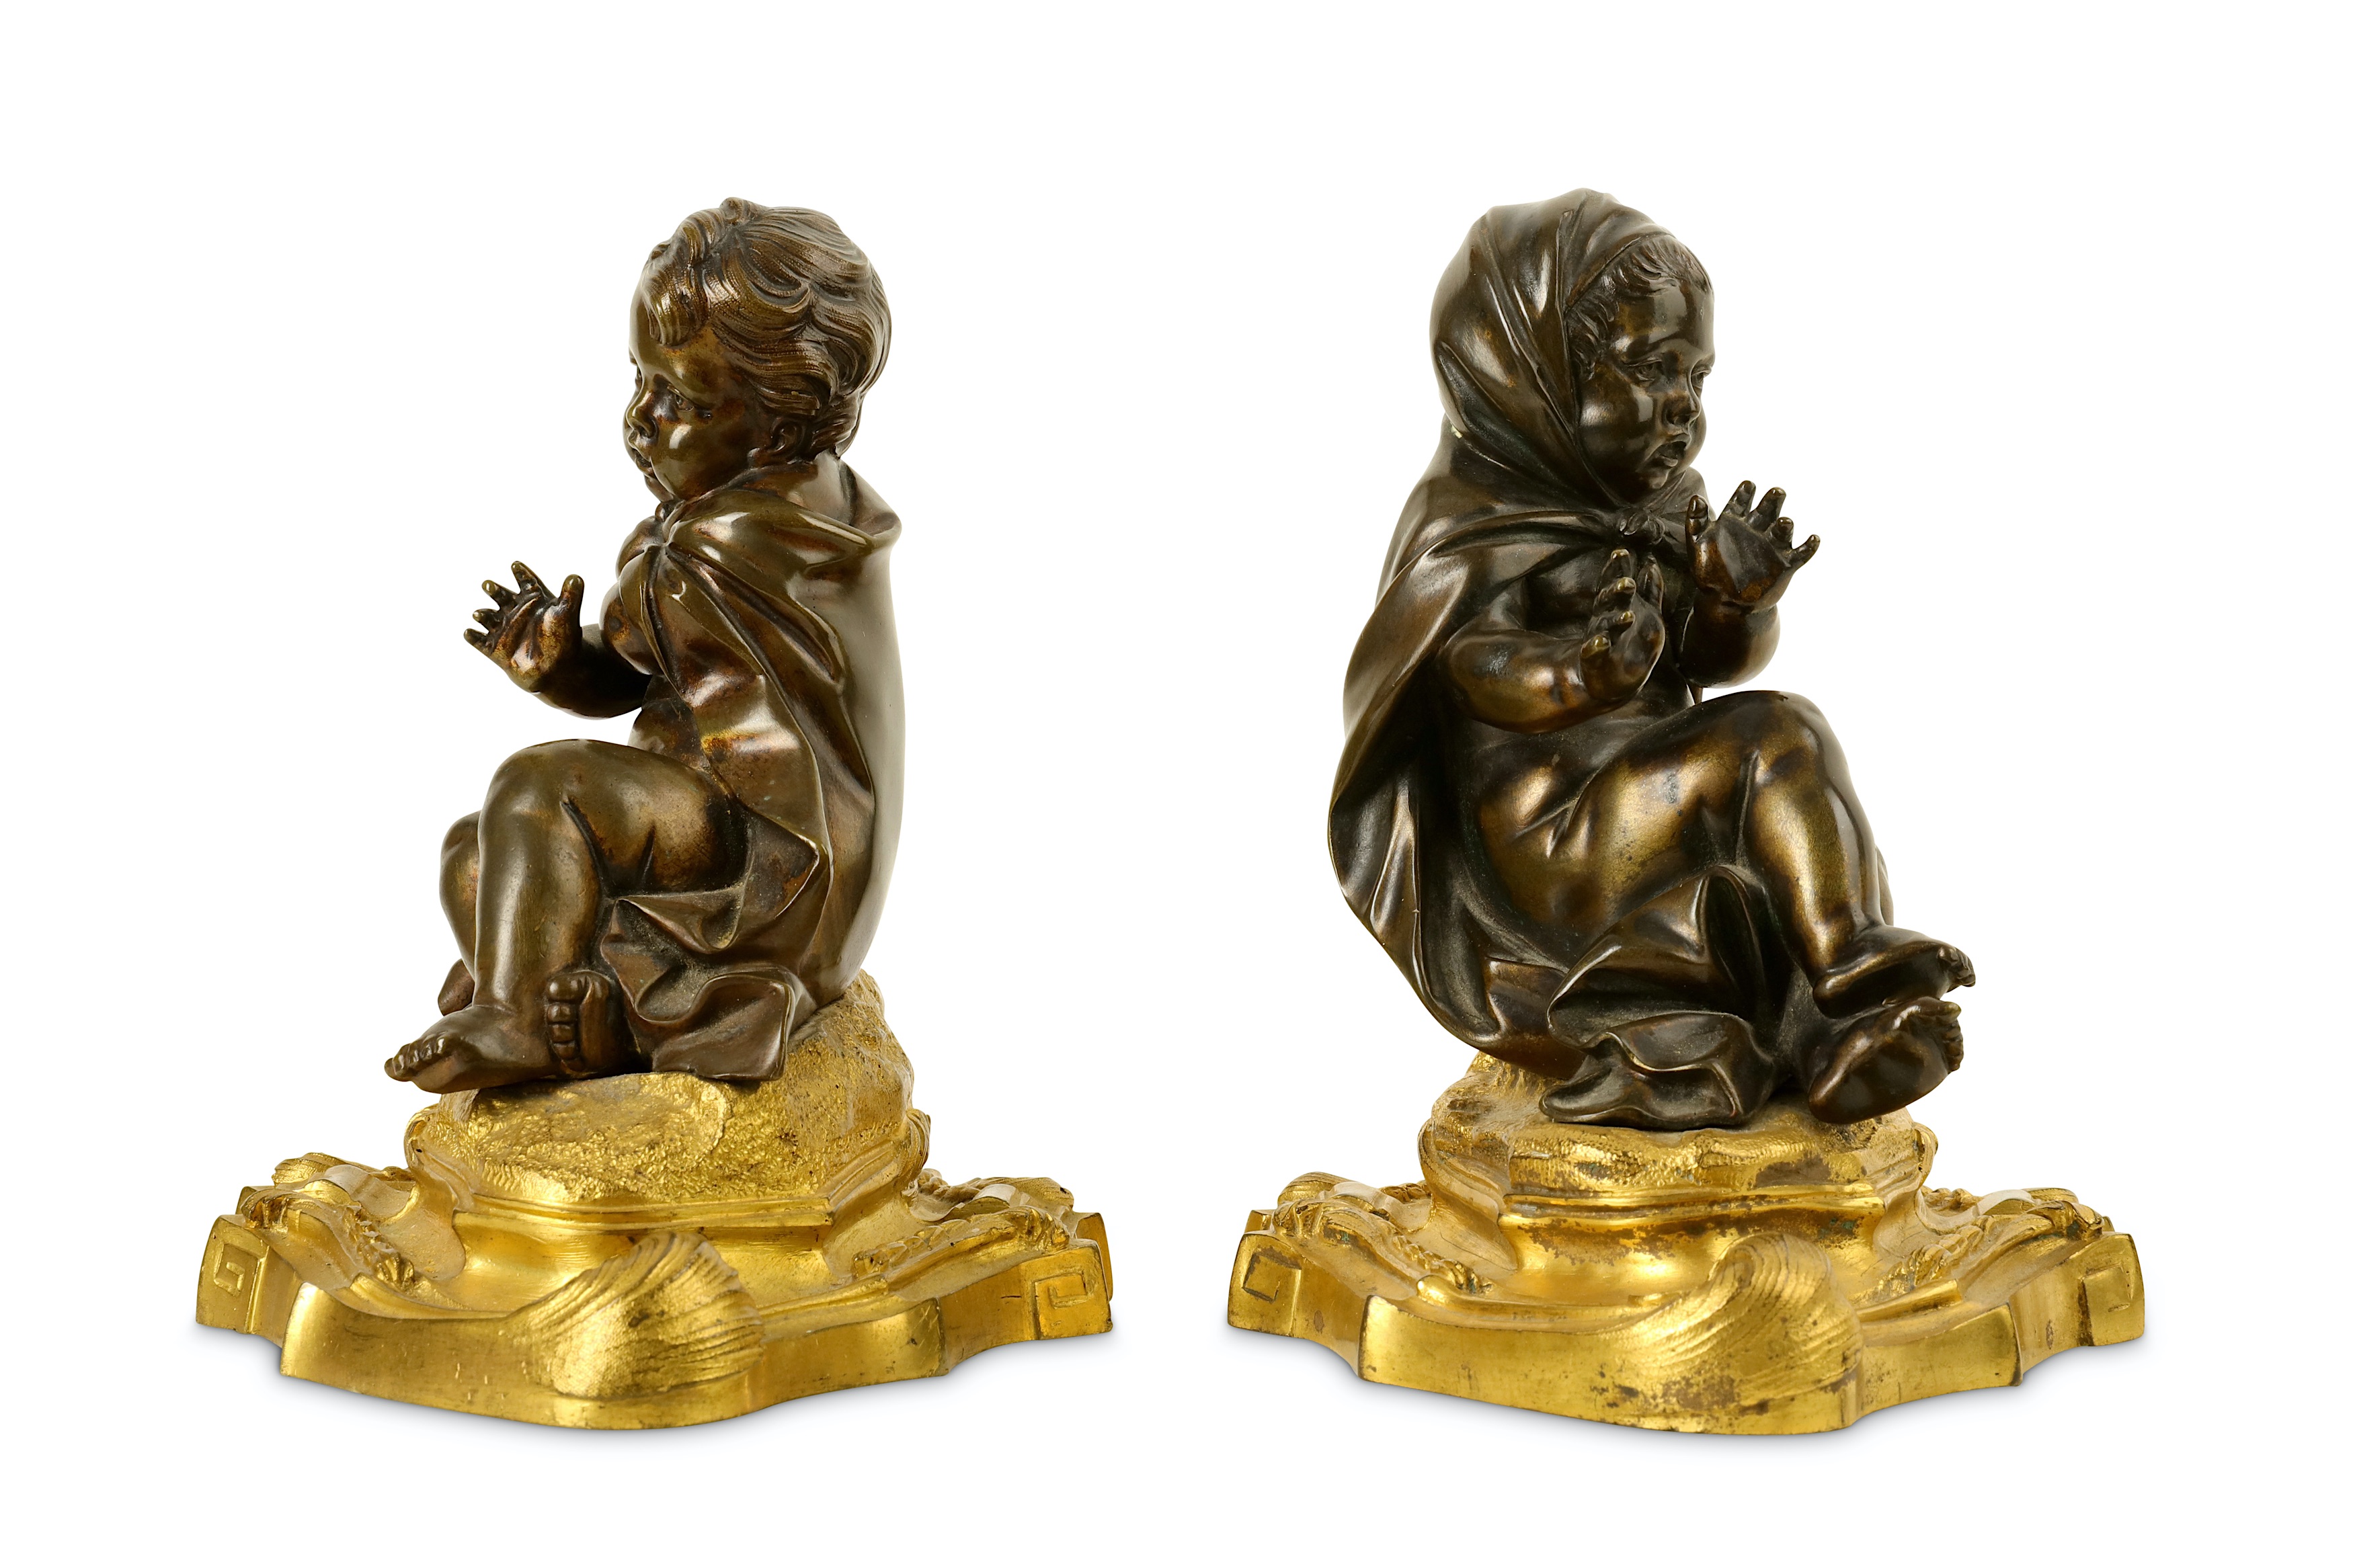 A PAIR OF LATE 18TH / EARLY 19TH CENTURY FRENCH BRONZE ALLEGORICAL FIGURES OF PUTTI REPRESENTING - Image 5 of 5